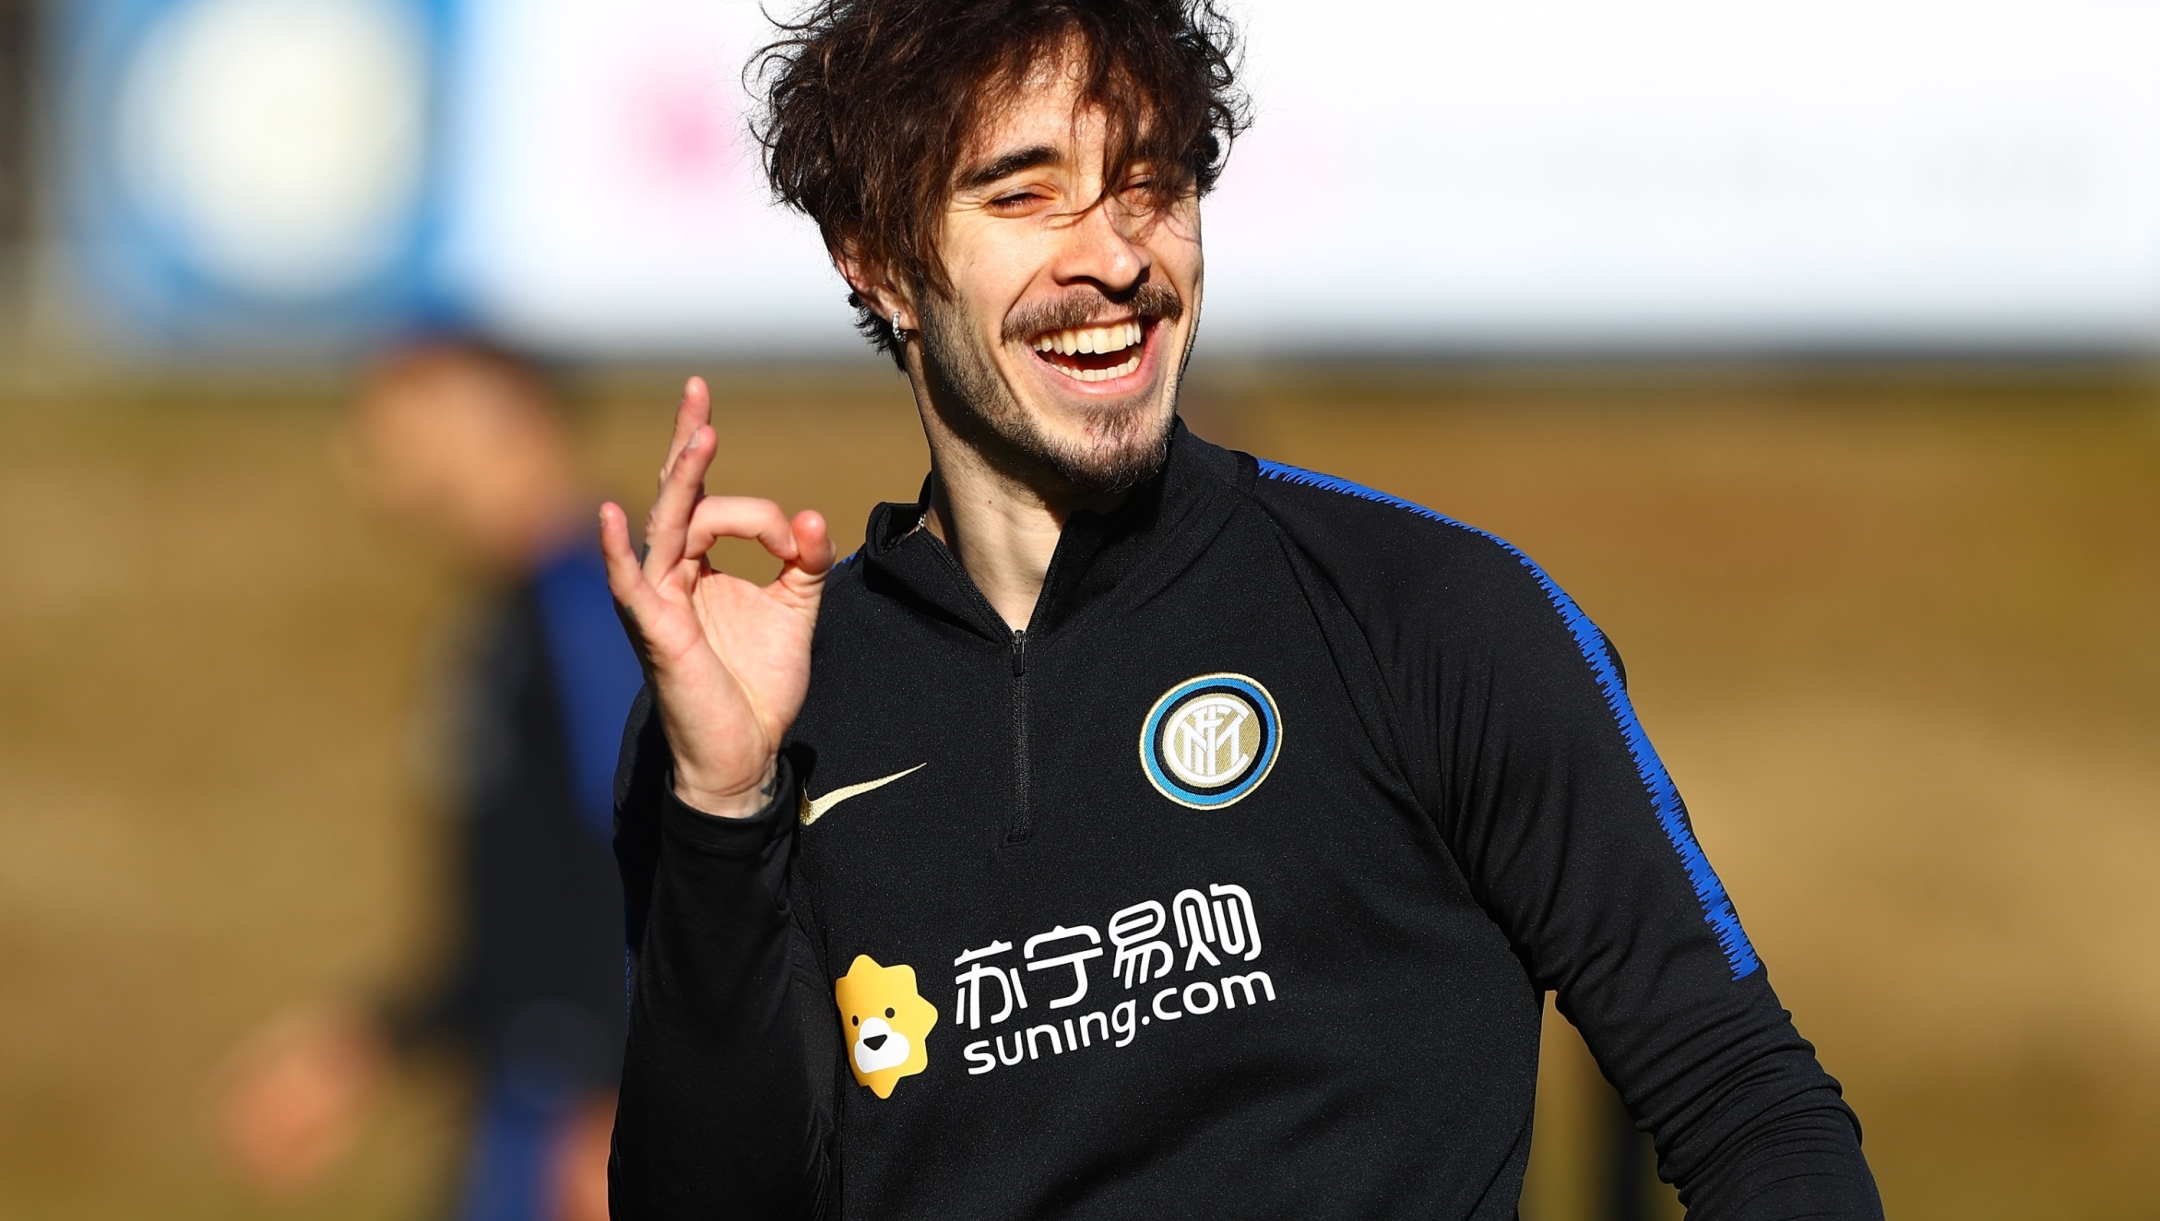 COMO, ITALY - JANUARY 15:  Sime Vrsaljko of FC Internazionale gestures during the FC Internazionale training session at the club's training ground Suning Training Center in memory of Angelo Moratti on January 22, 2019 in Como, Italy.  (Photo by Marco Luzzani - Inter/Inter via Getty Images)